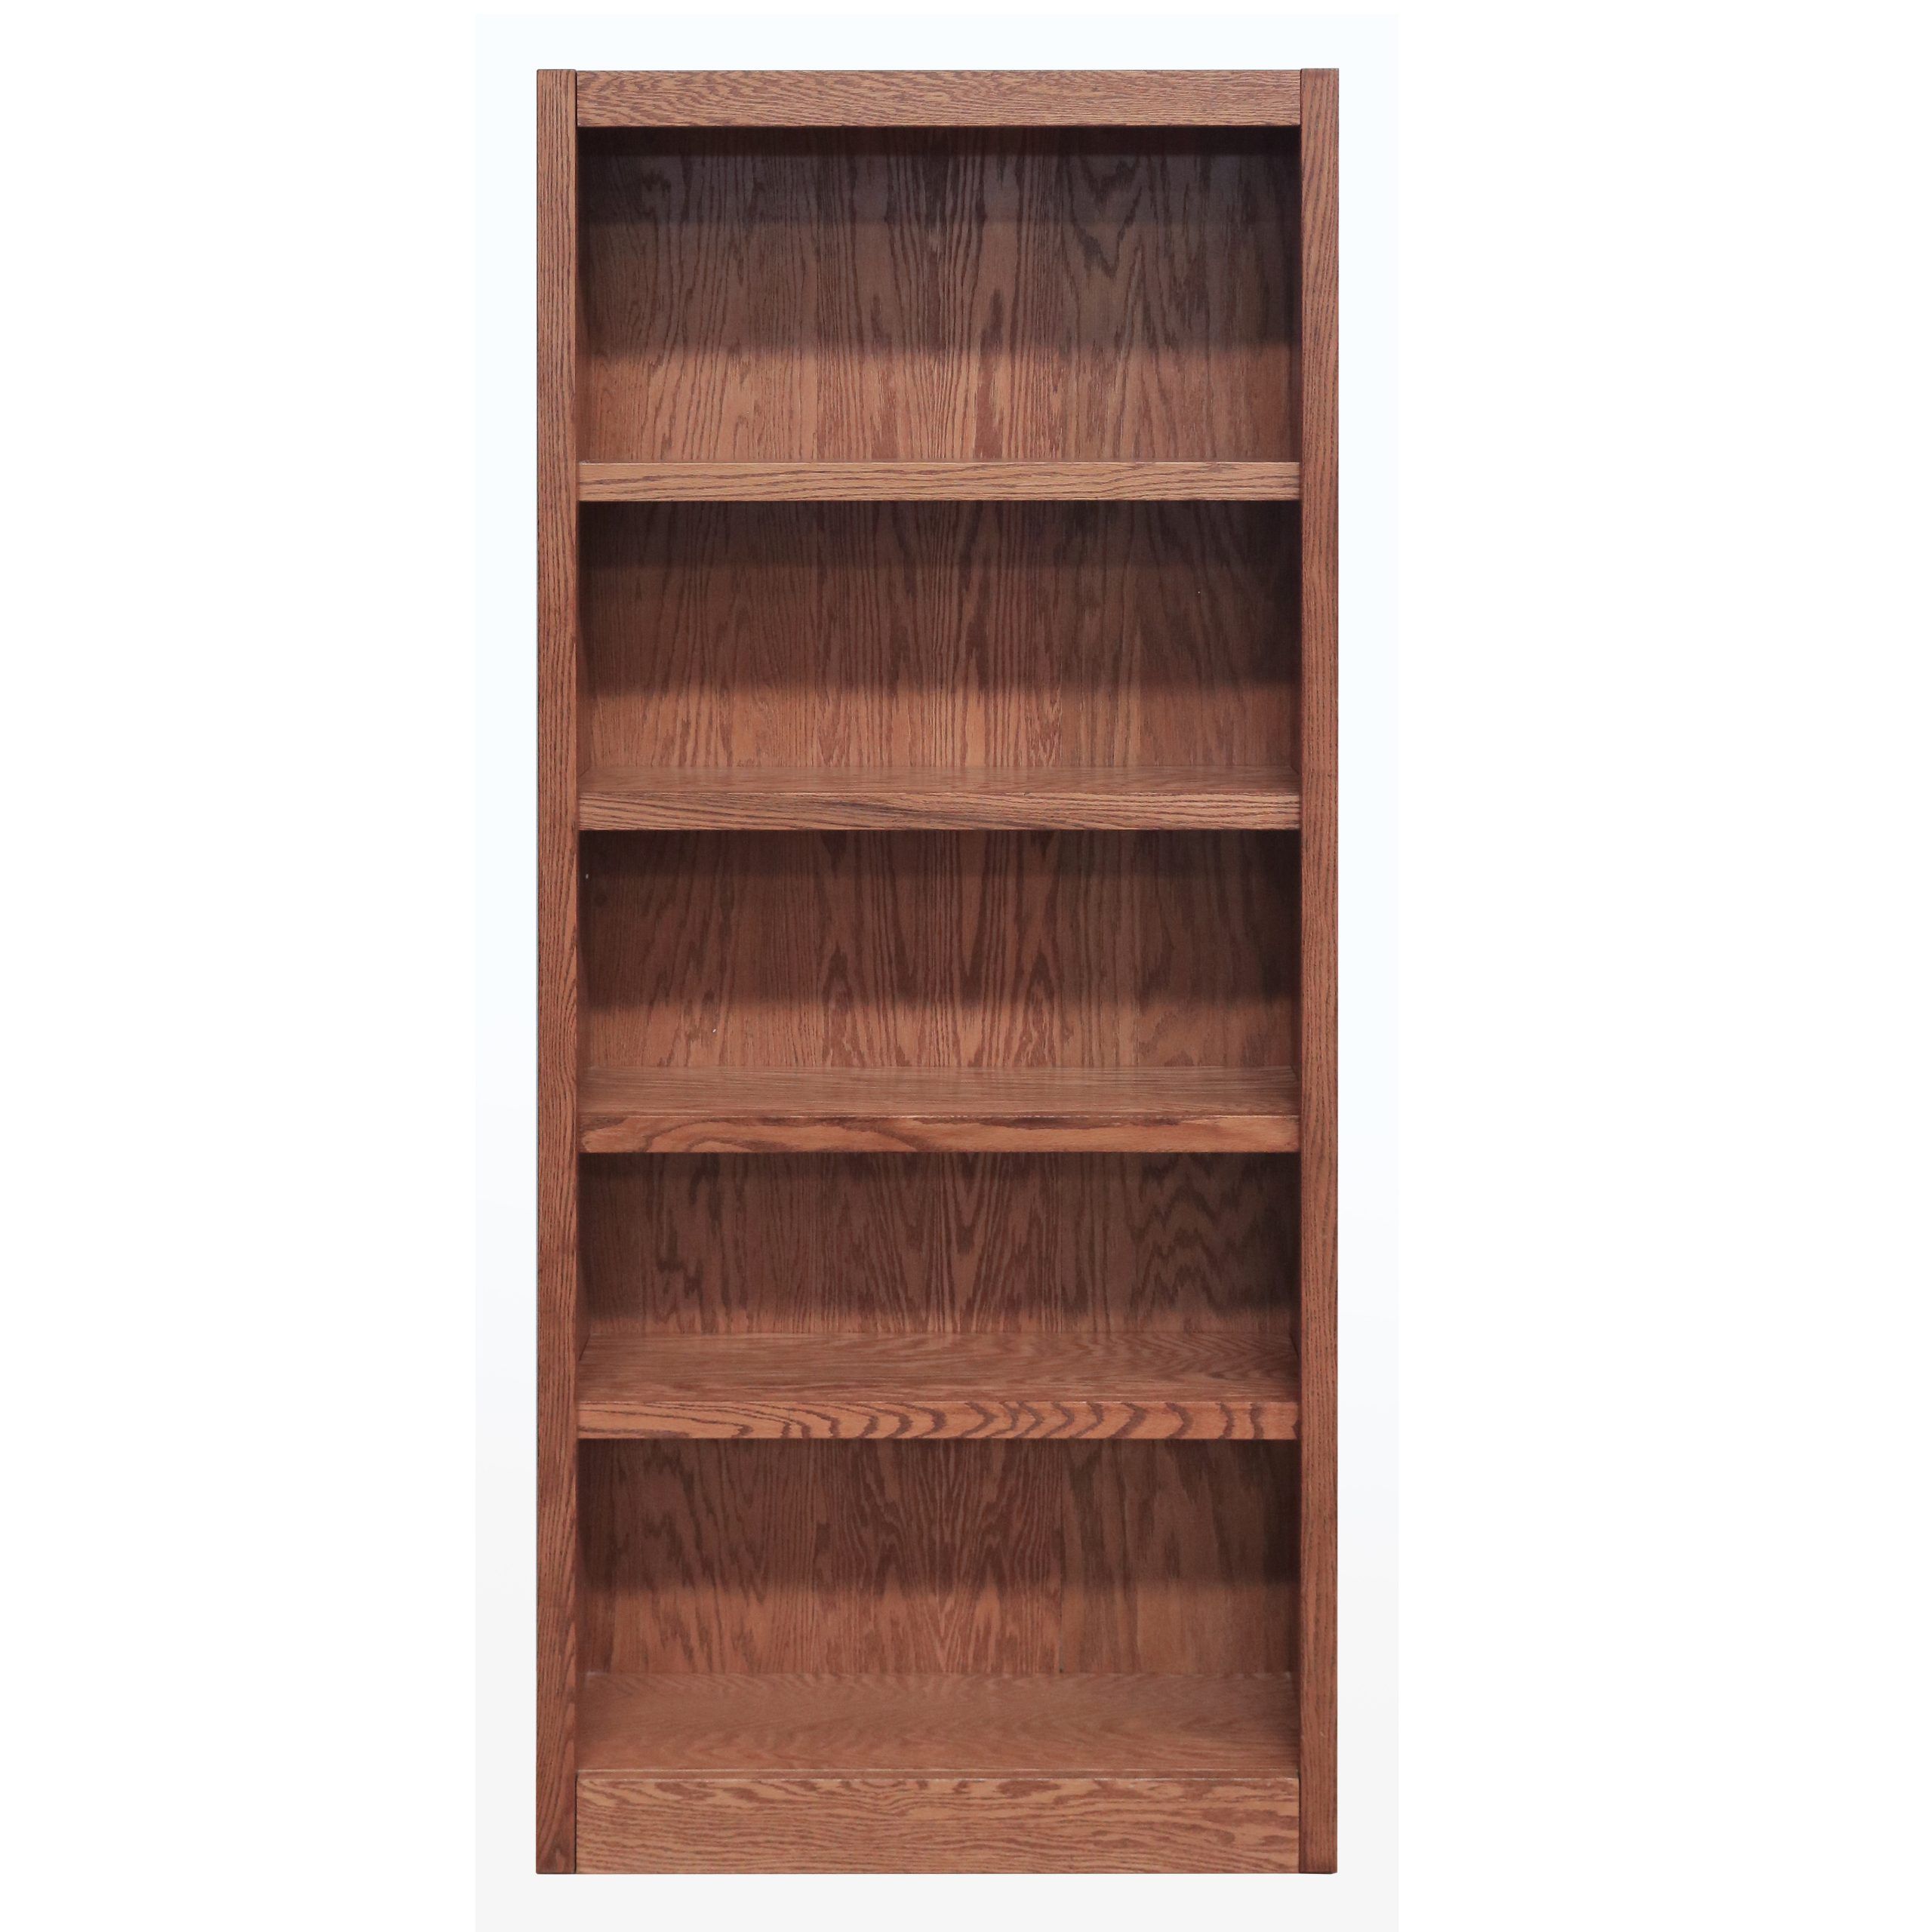 Concepts In Wood 5 Shelf Wood Bookcase, 72 Inch Tall – Oak Finish –  Walmart Regarding 72 Inch Bookcases With Cabinet (View 9 of 15)